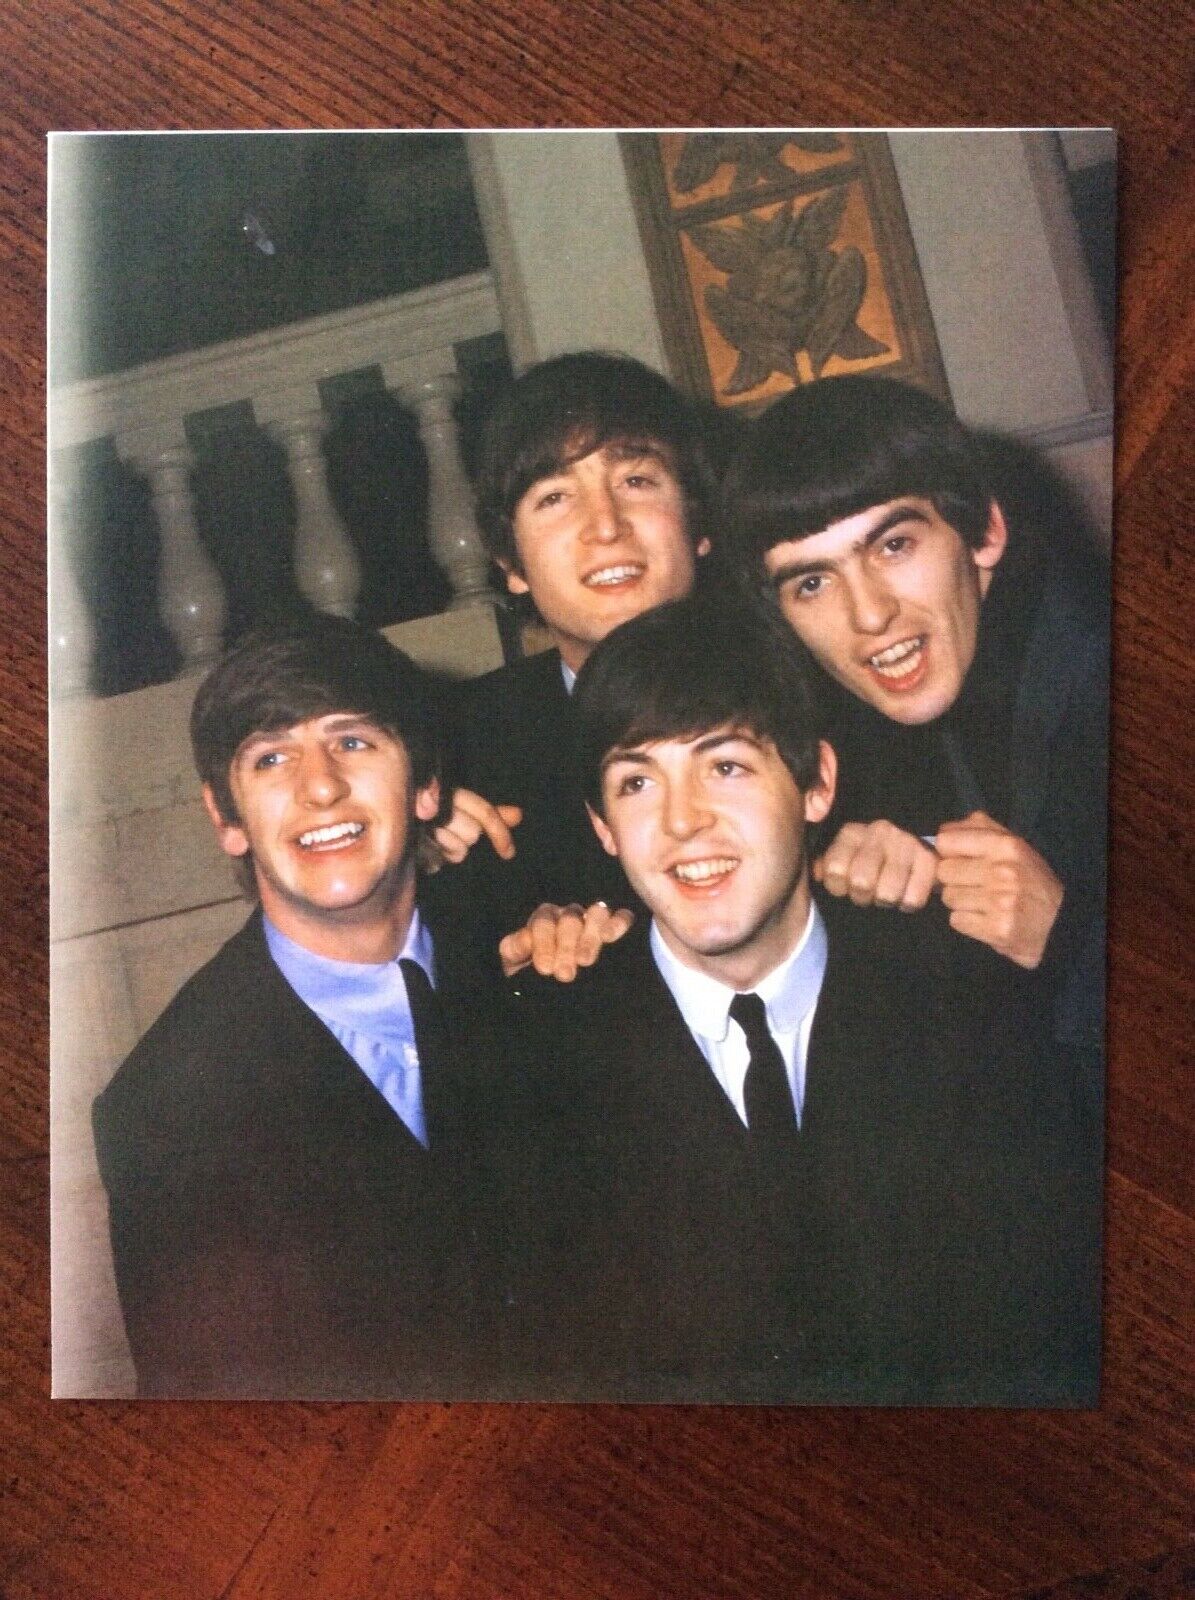 Famous People Color book photo The Beatles fantastic condition 